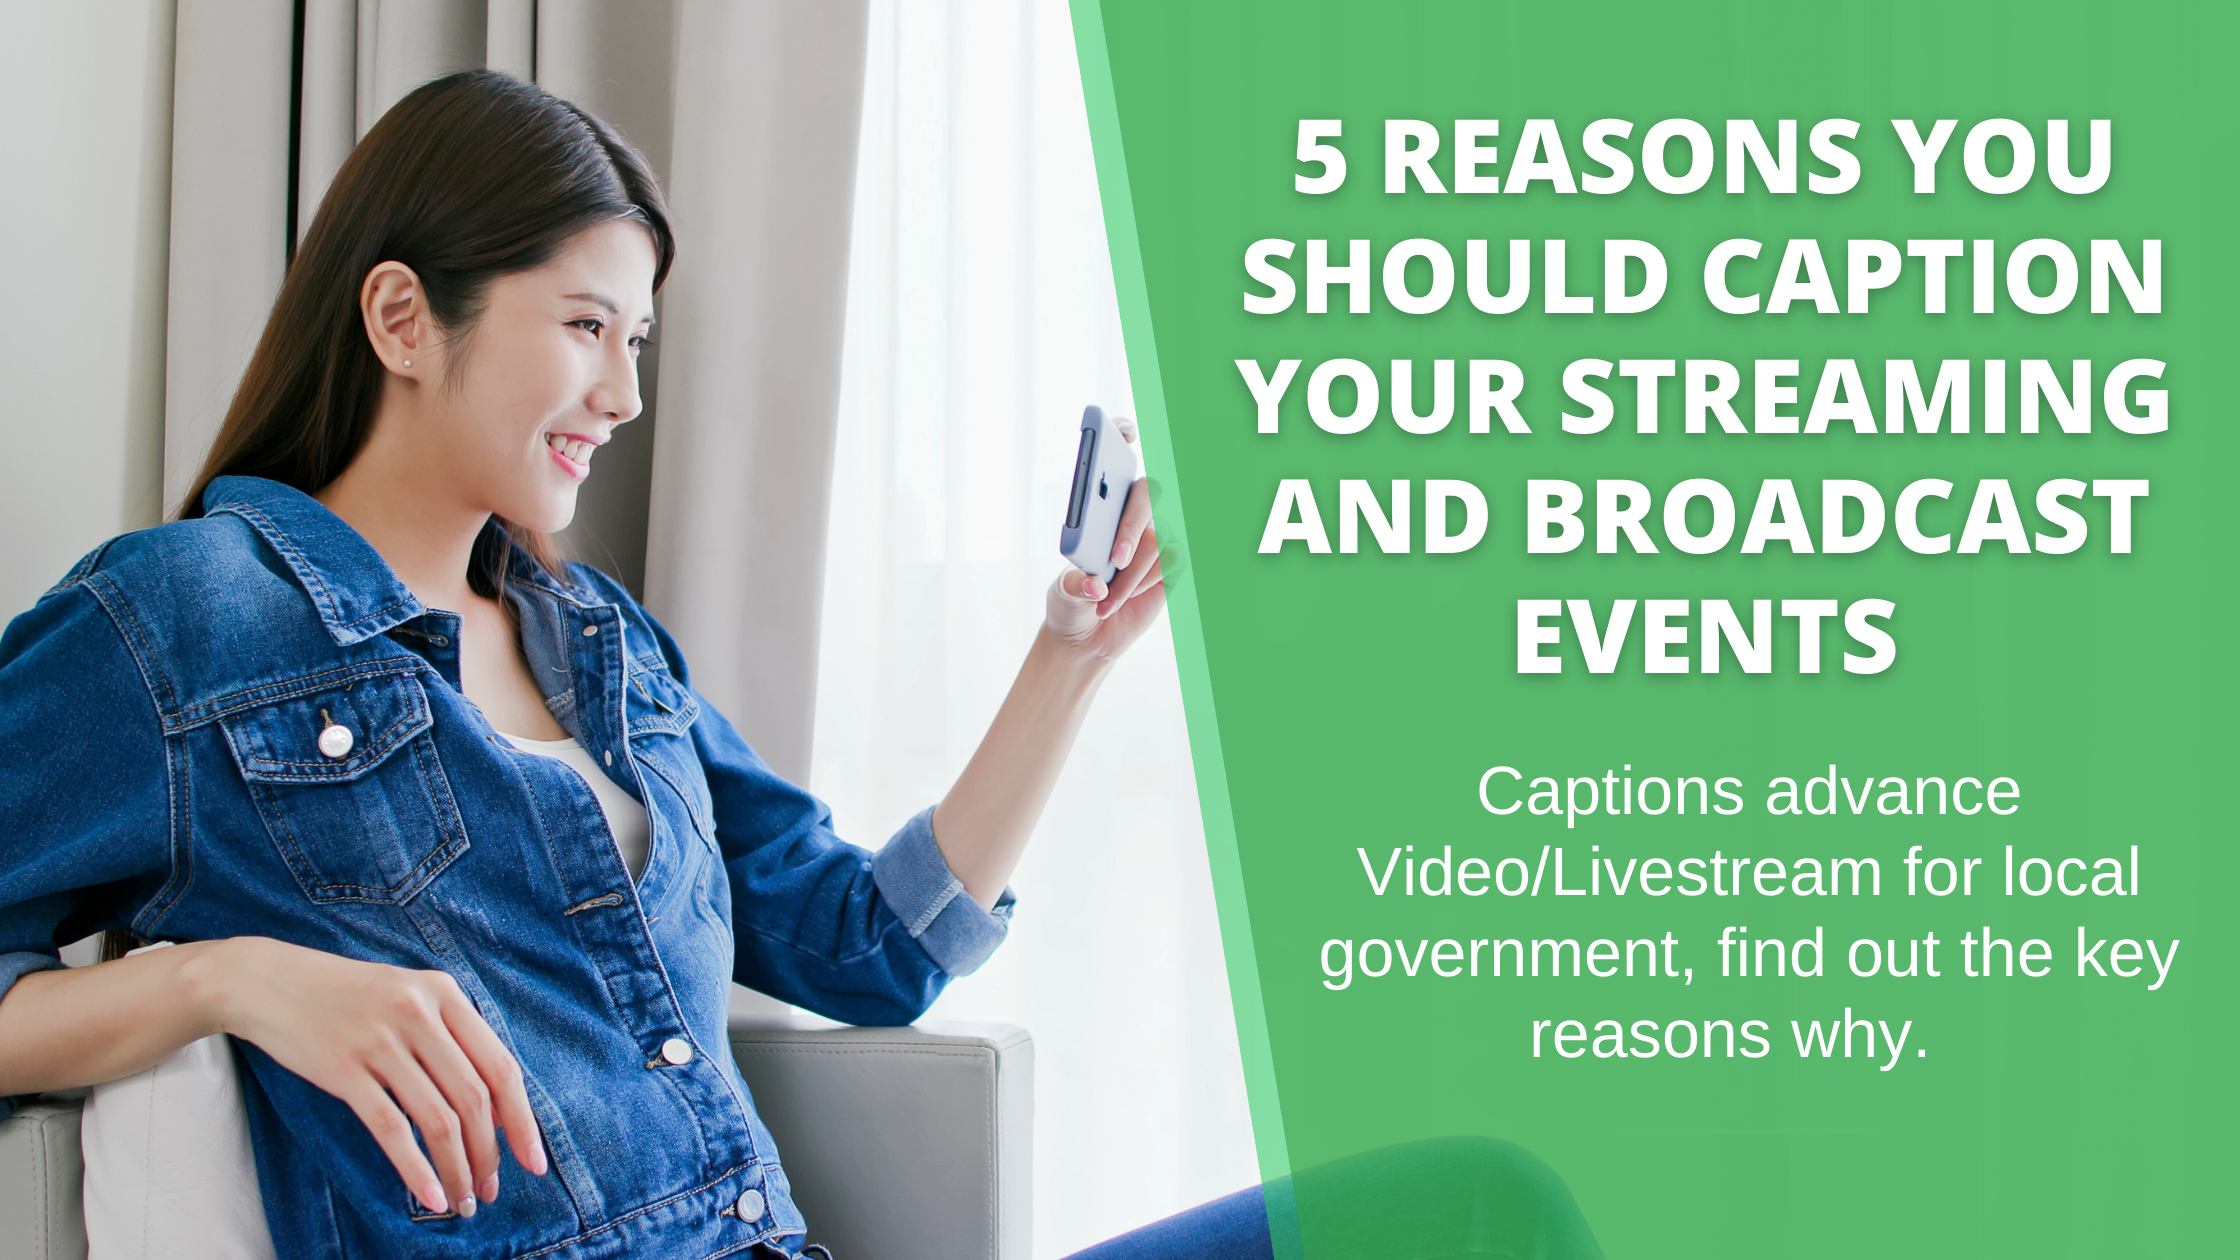 5 Reasons You Should Caption Your Streaming and Broadcast Events